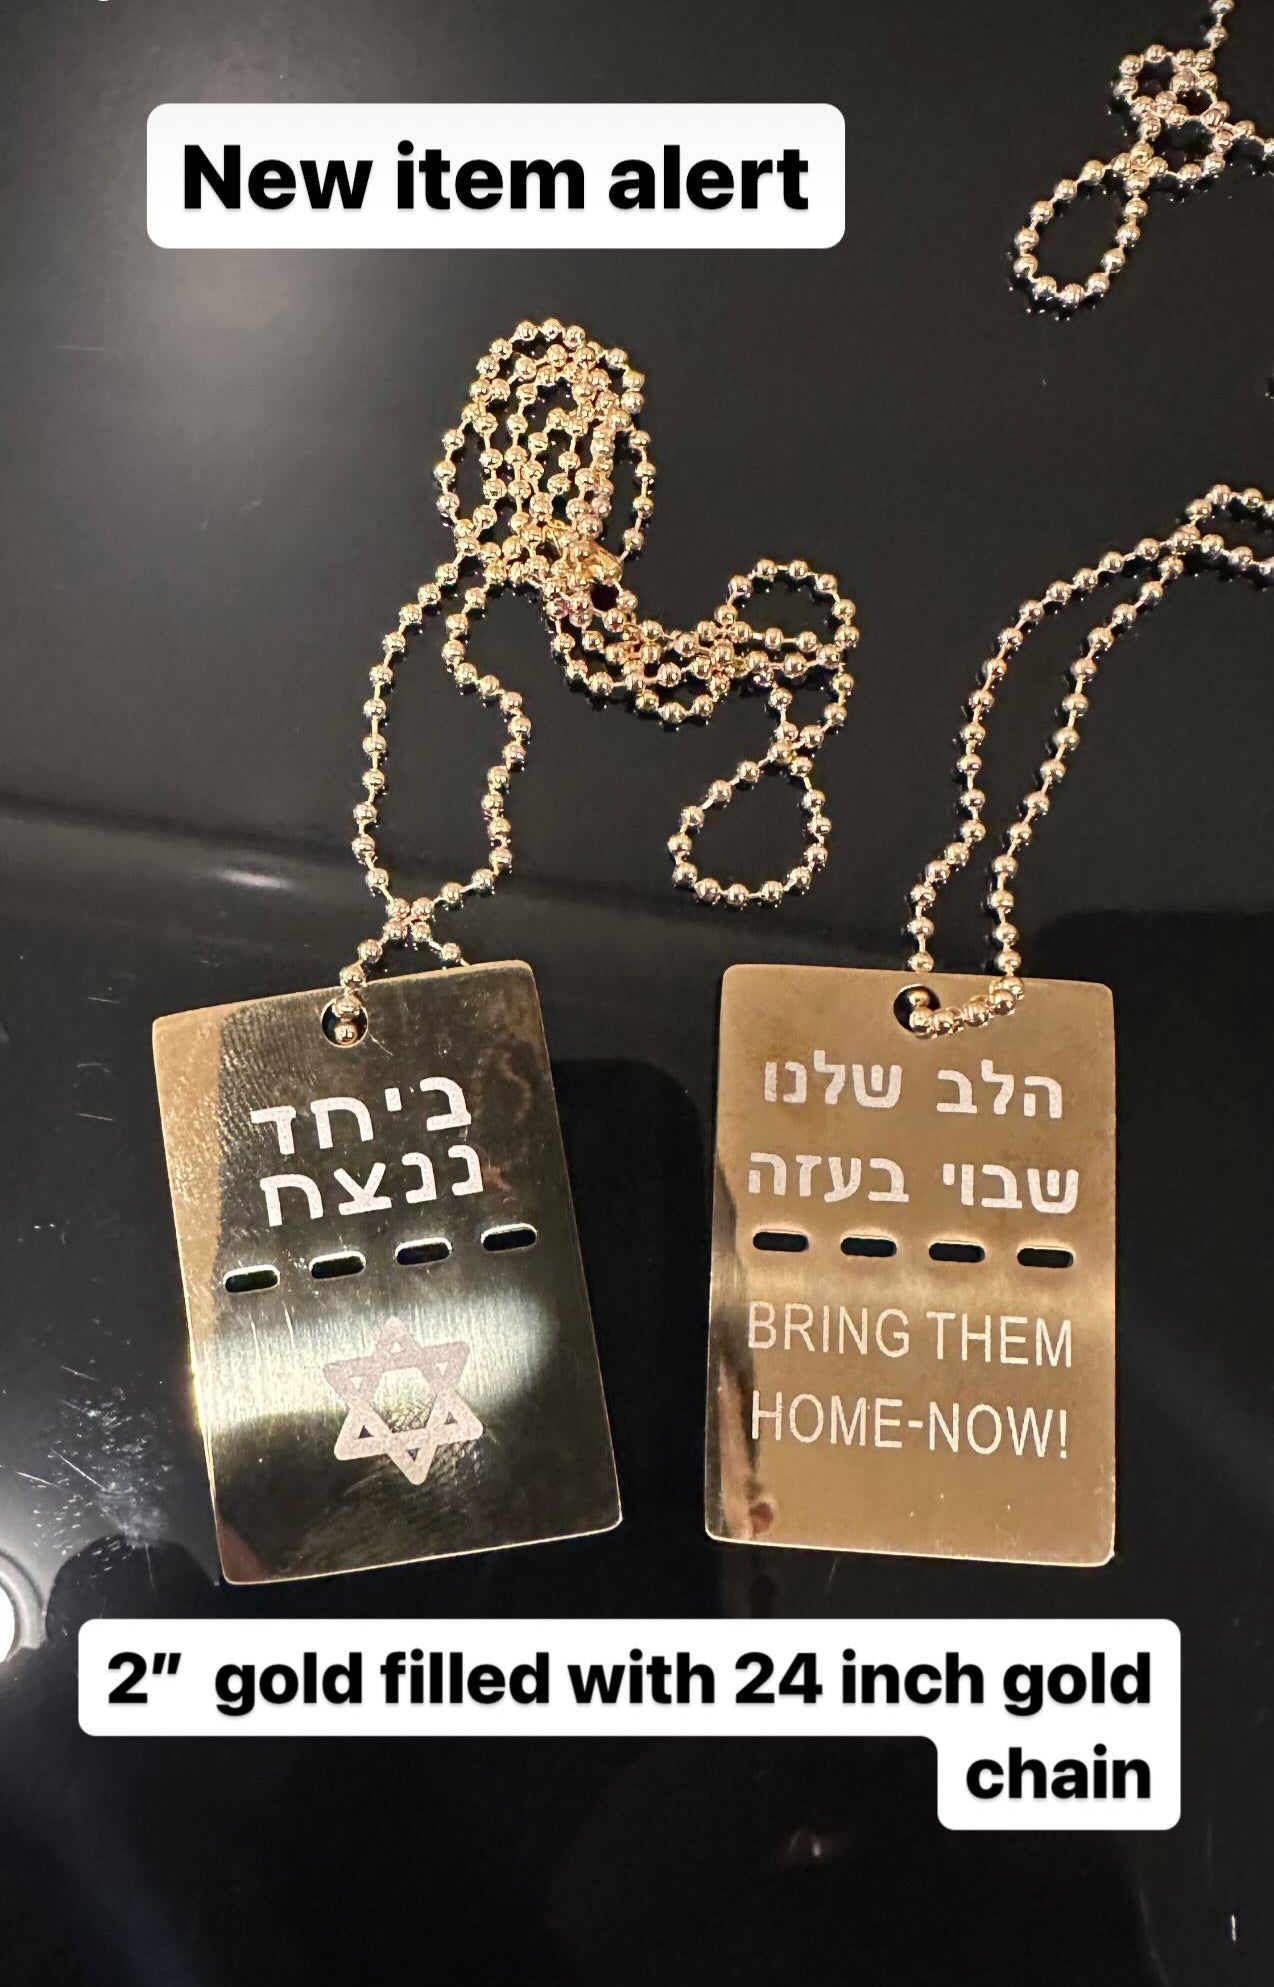 5 pack    2 inch double sided dog tag hand maid in Israel with 24 inch chain  15% off today